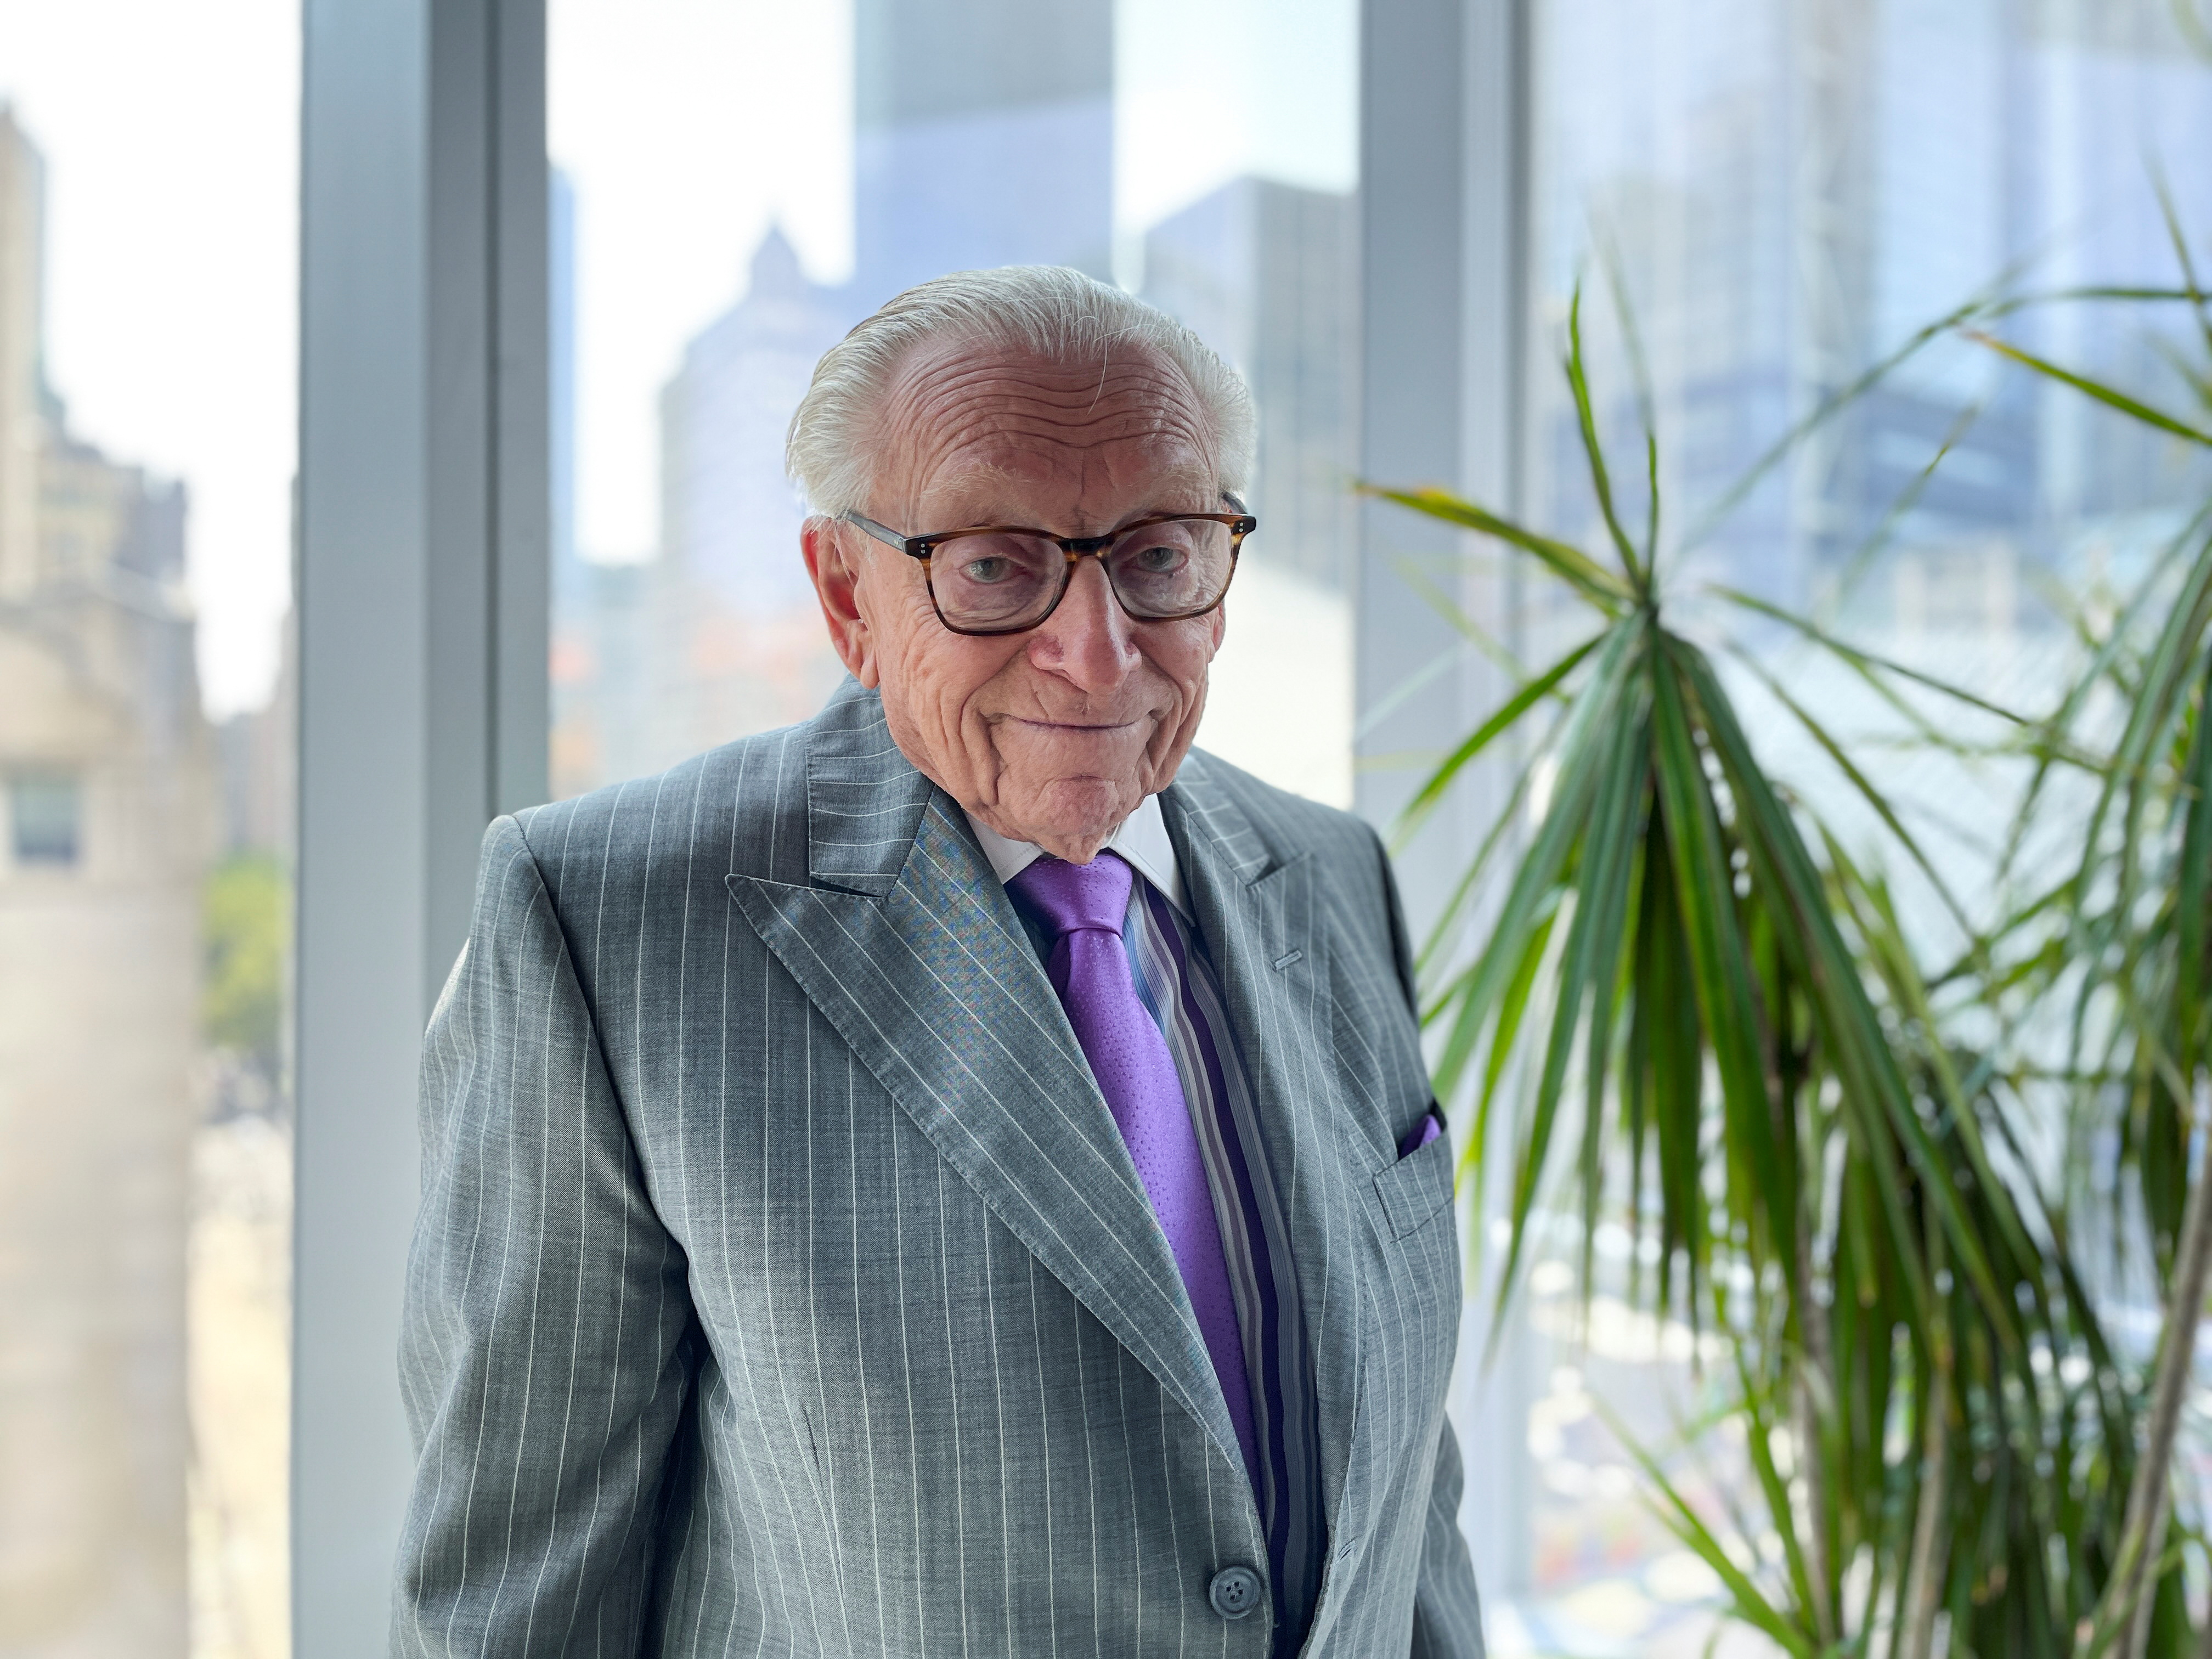 Real estate developer Larry Silverstein, poses at 7 World Trade Center in New York